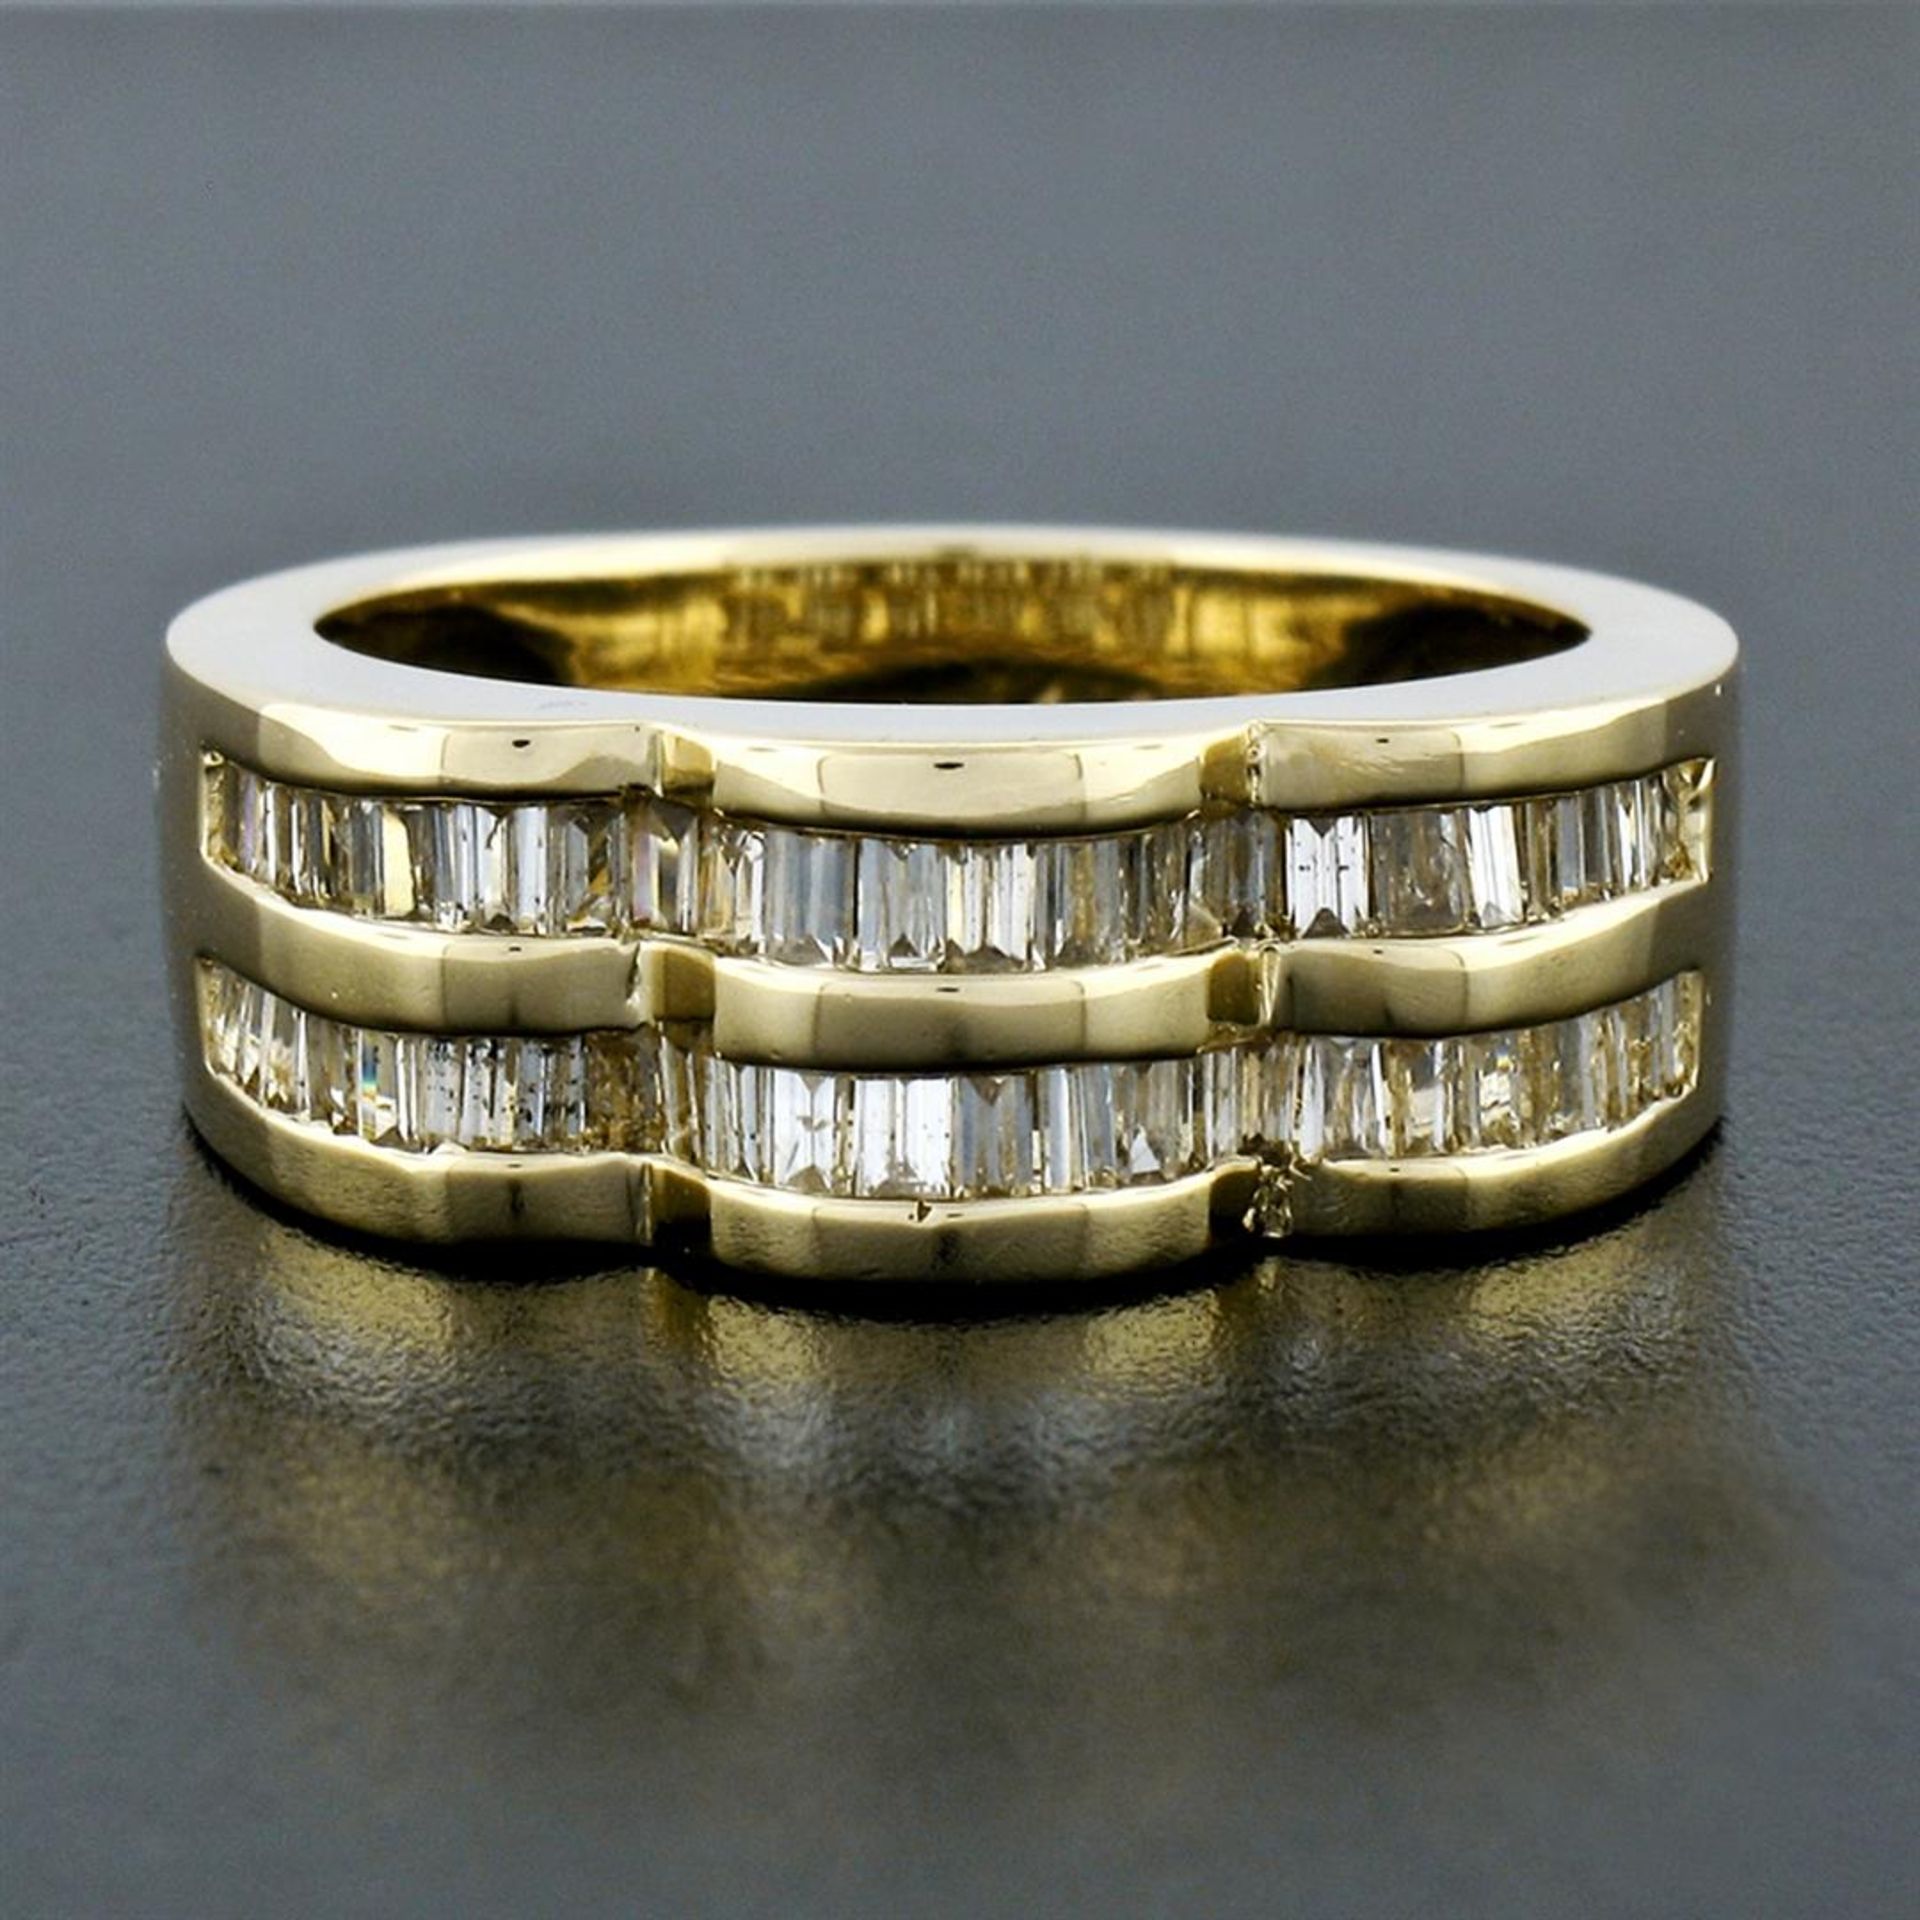 14k Yellow Gold .95 ctw Baguette Cut Diamond Wavy Grooved Dual Row Band Ring - Image 2 of 8